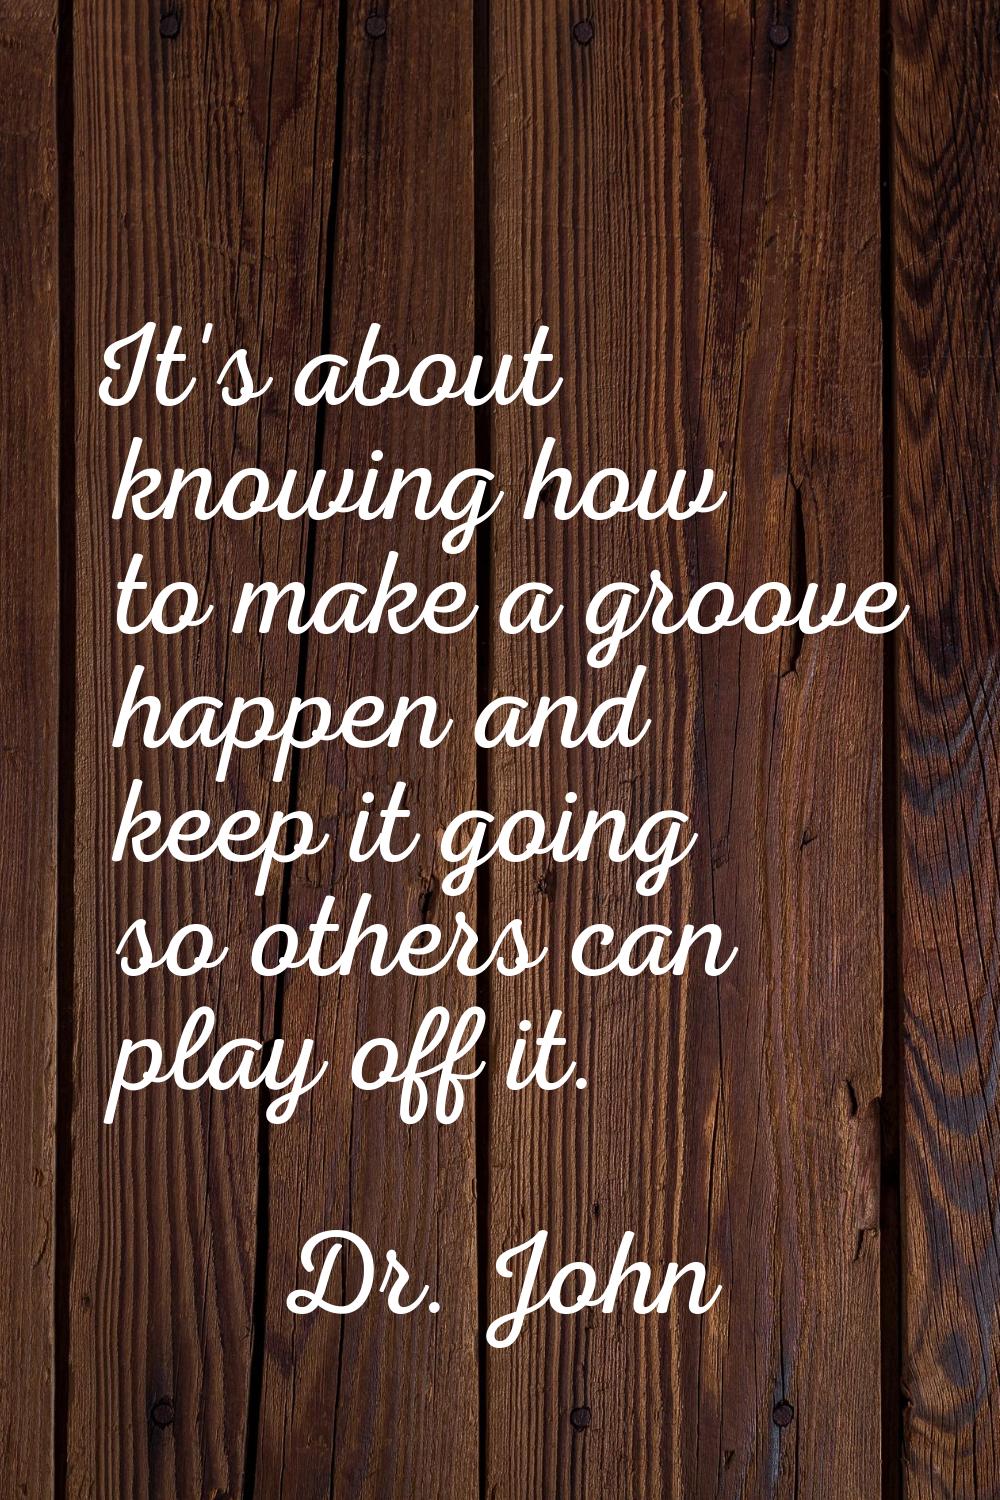 It's about knowing how to make a groove happen and keep it going so others can play off it.